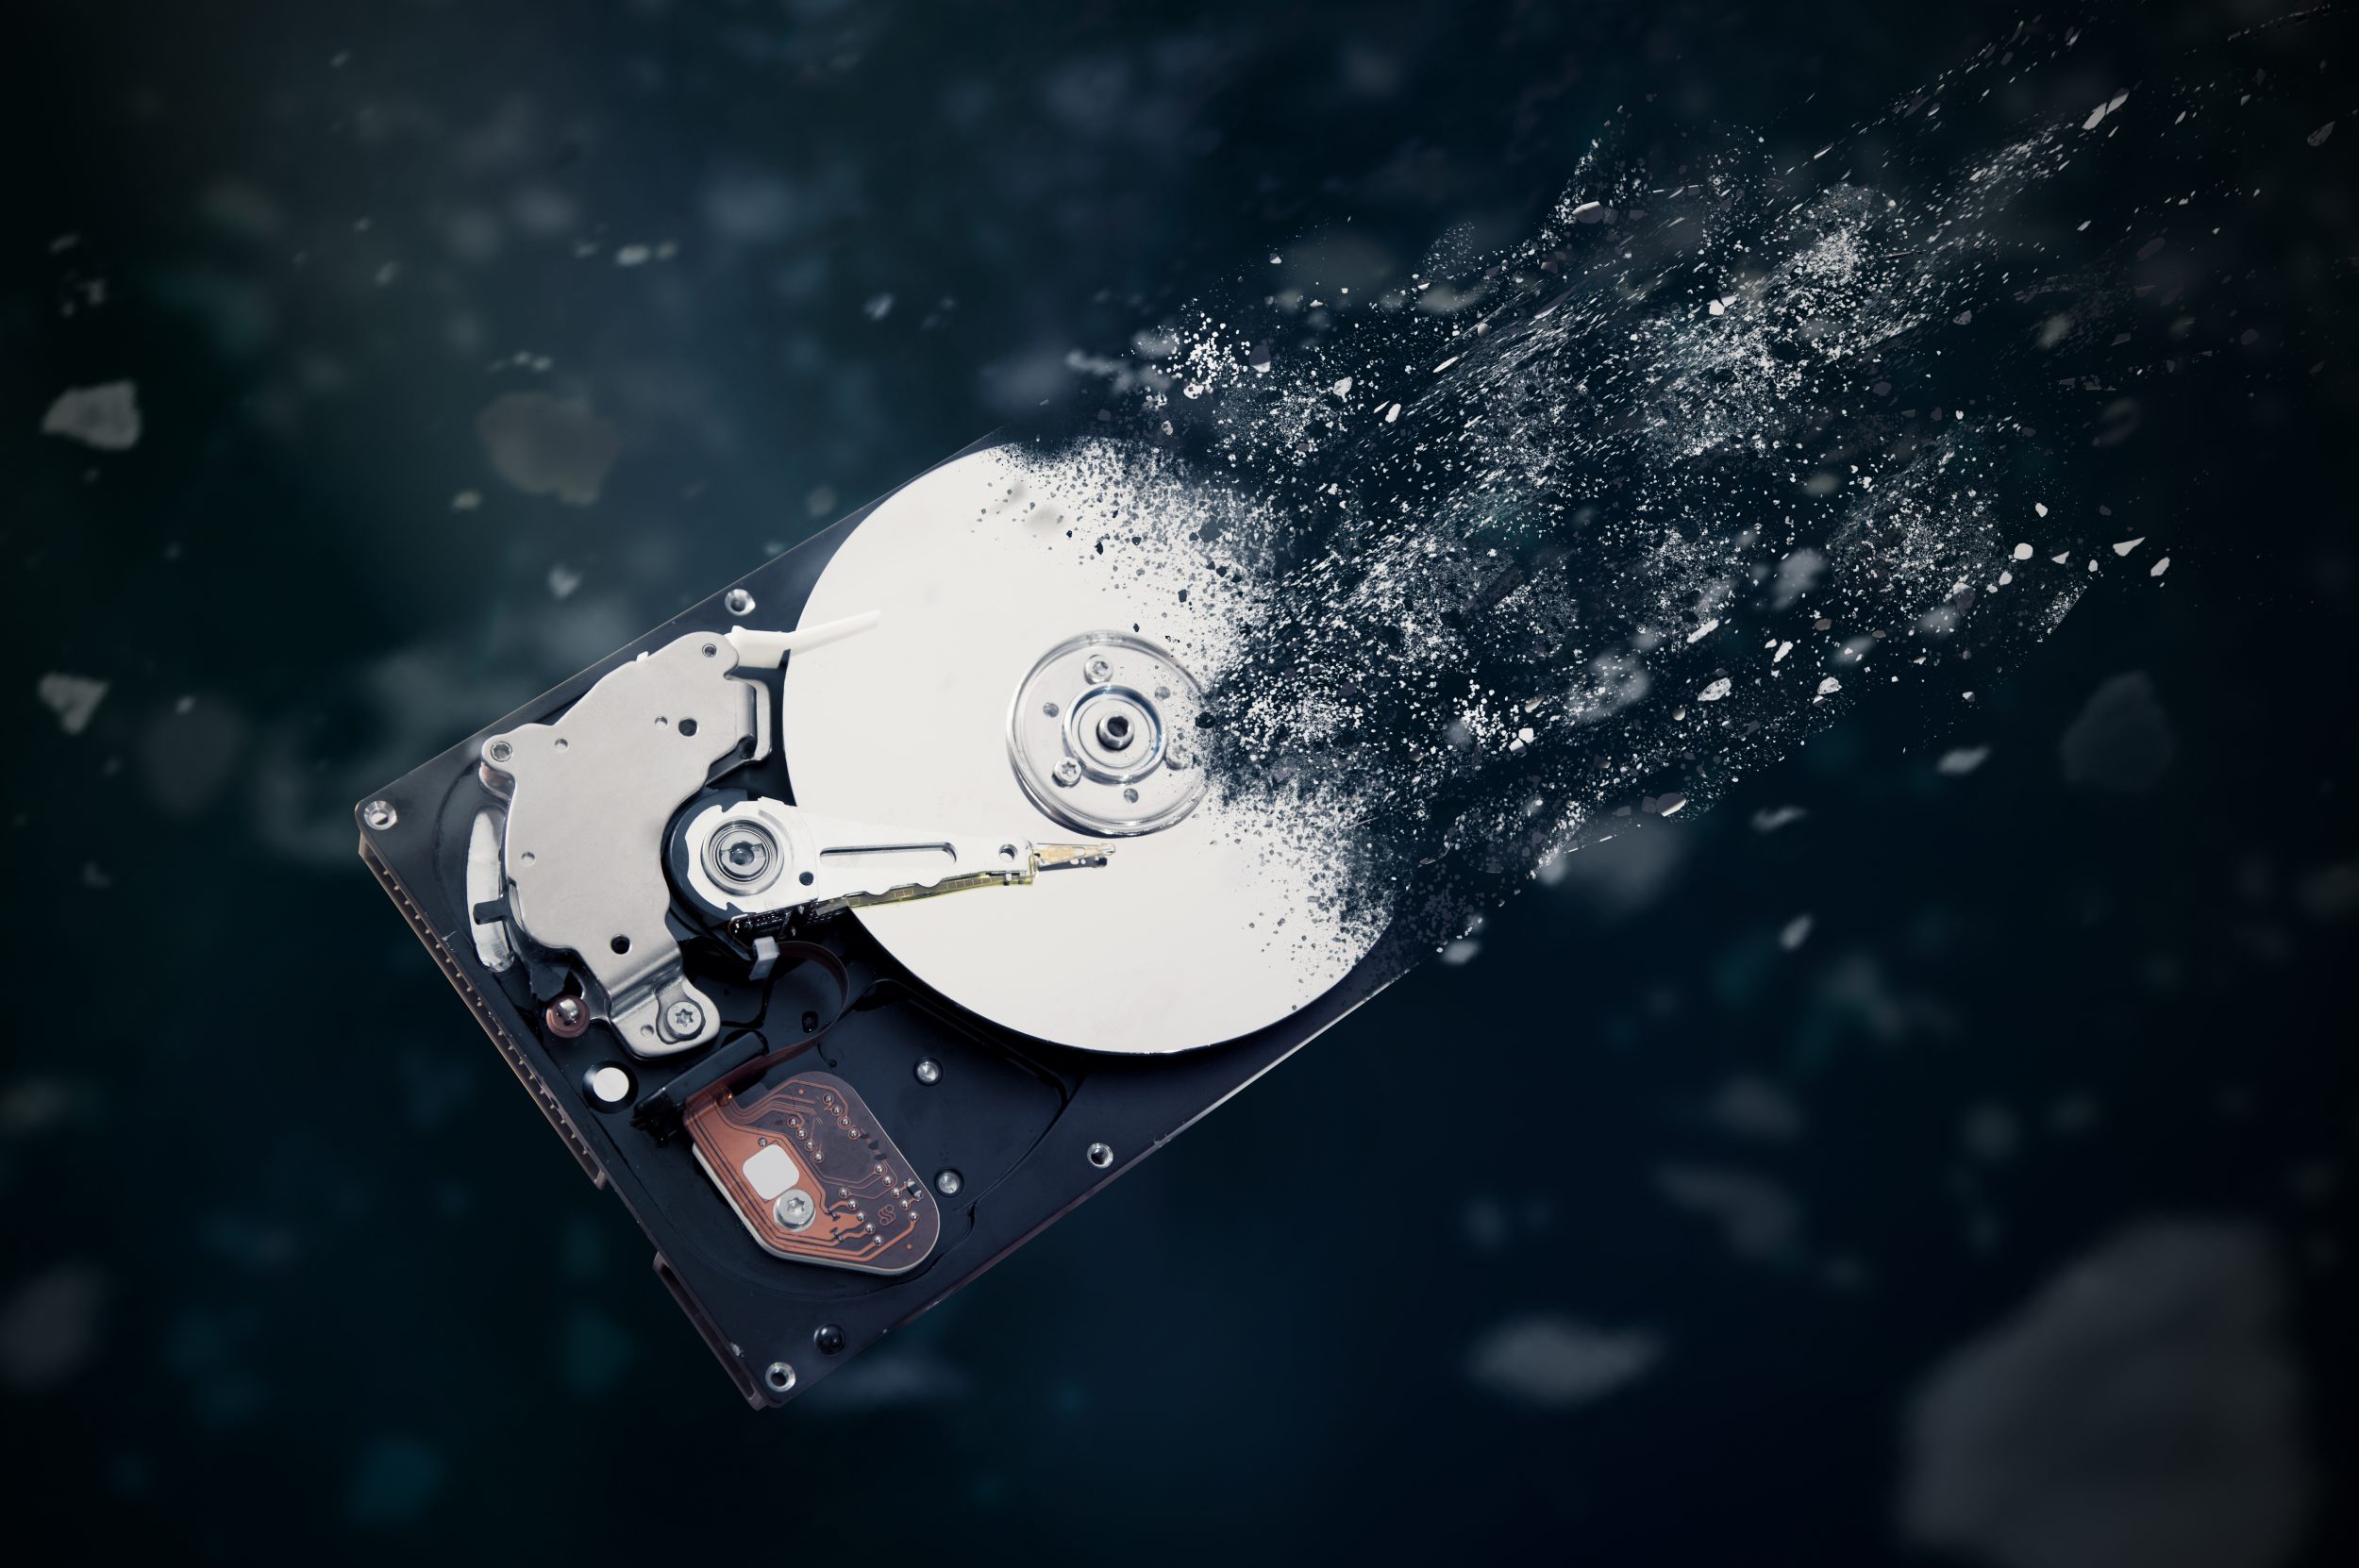 The old hard disk drive is disintegrating